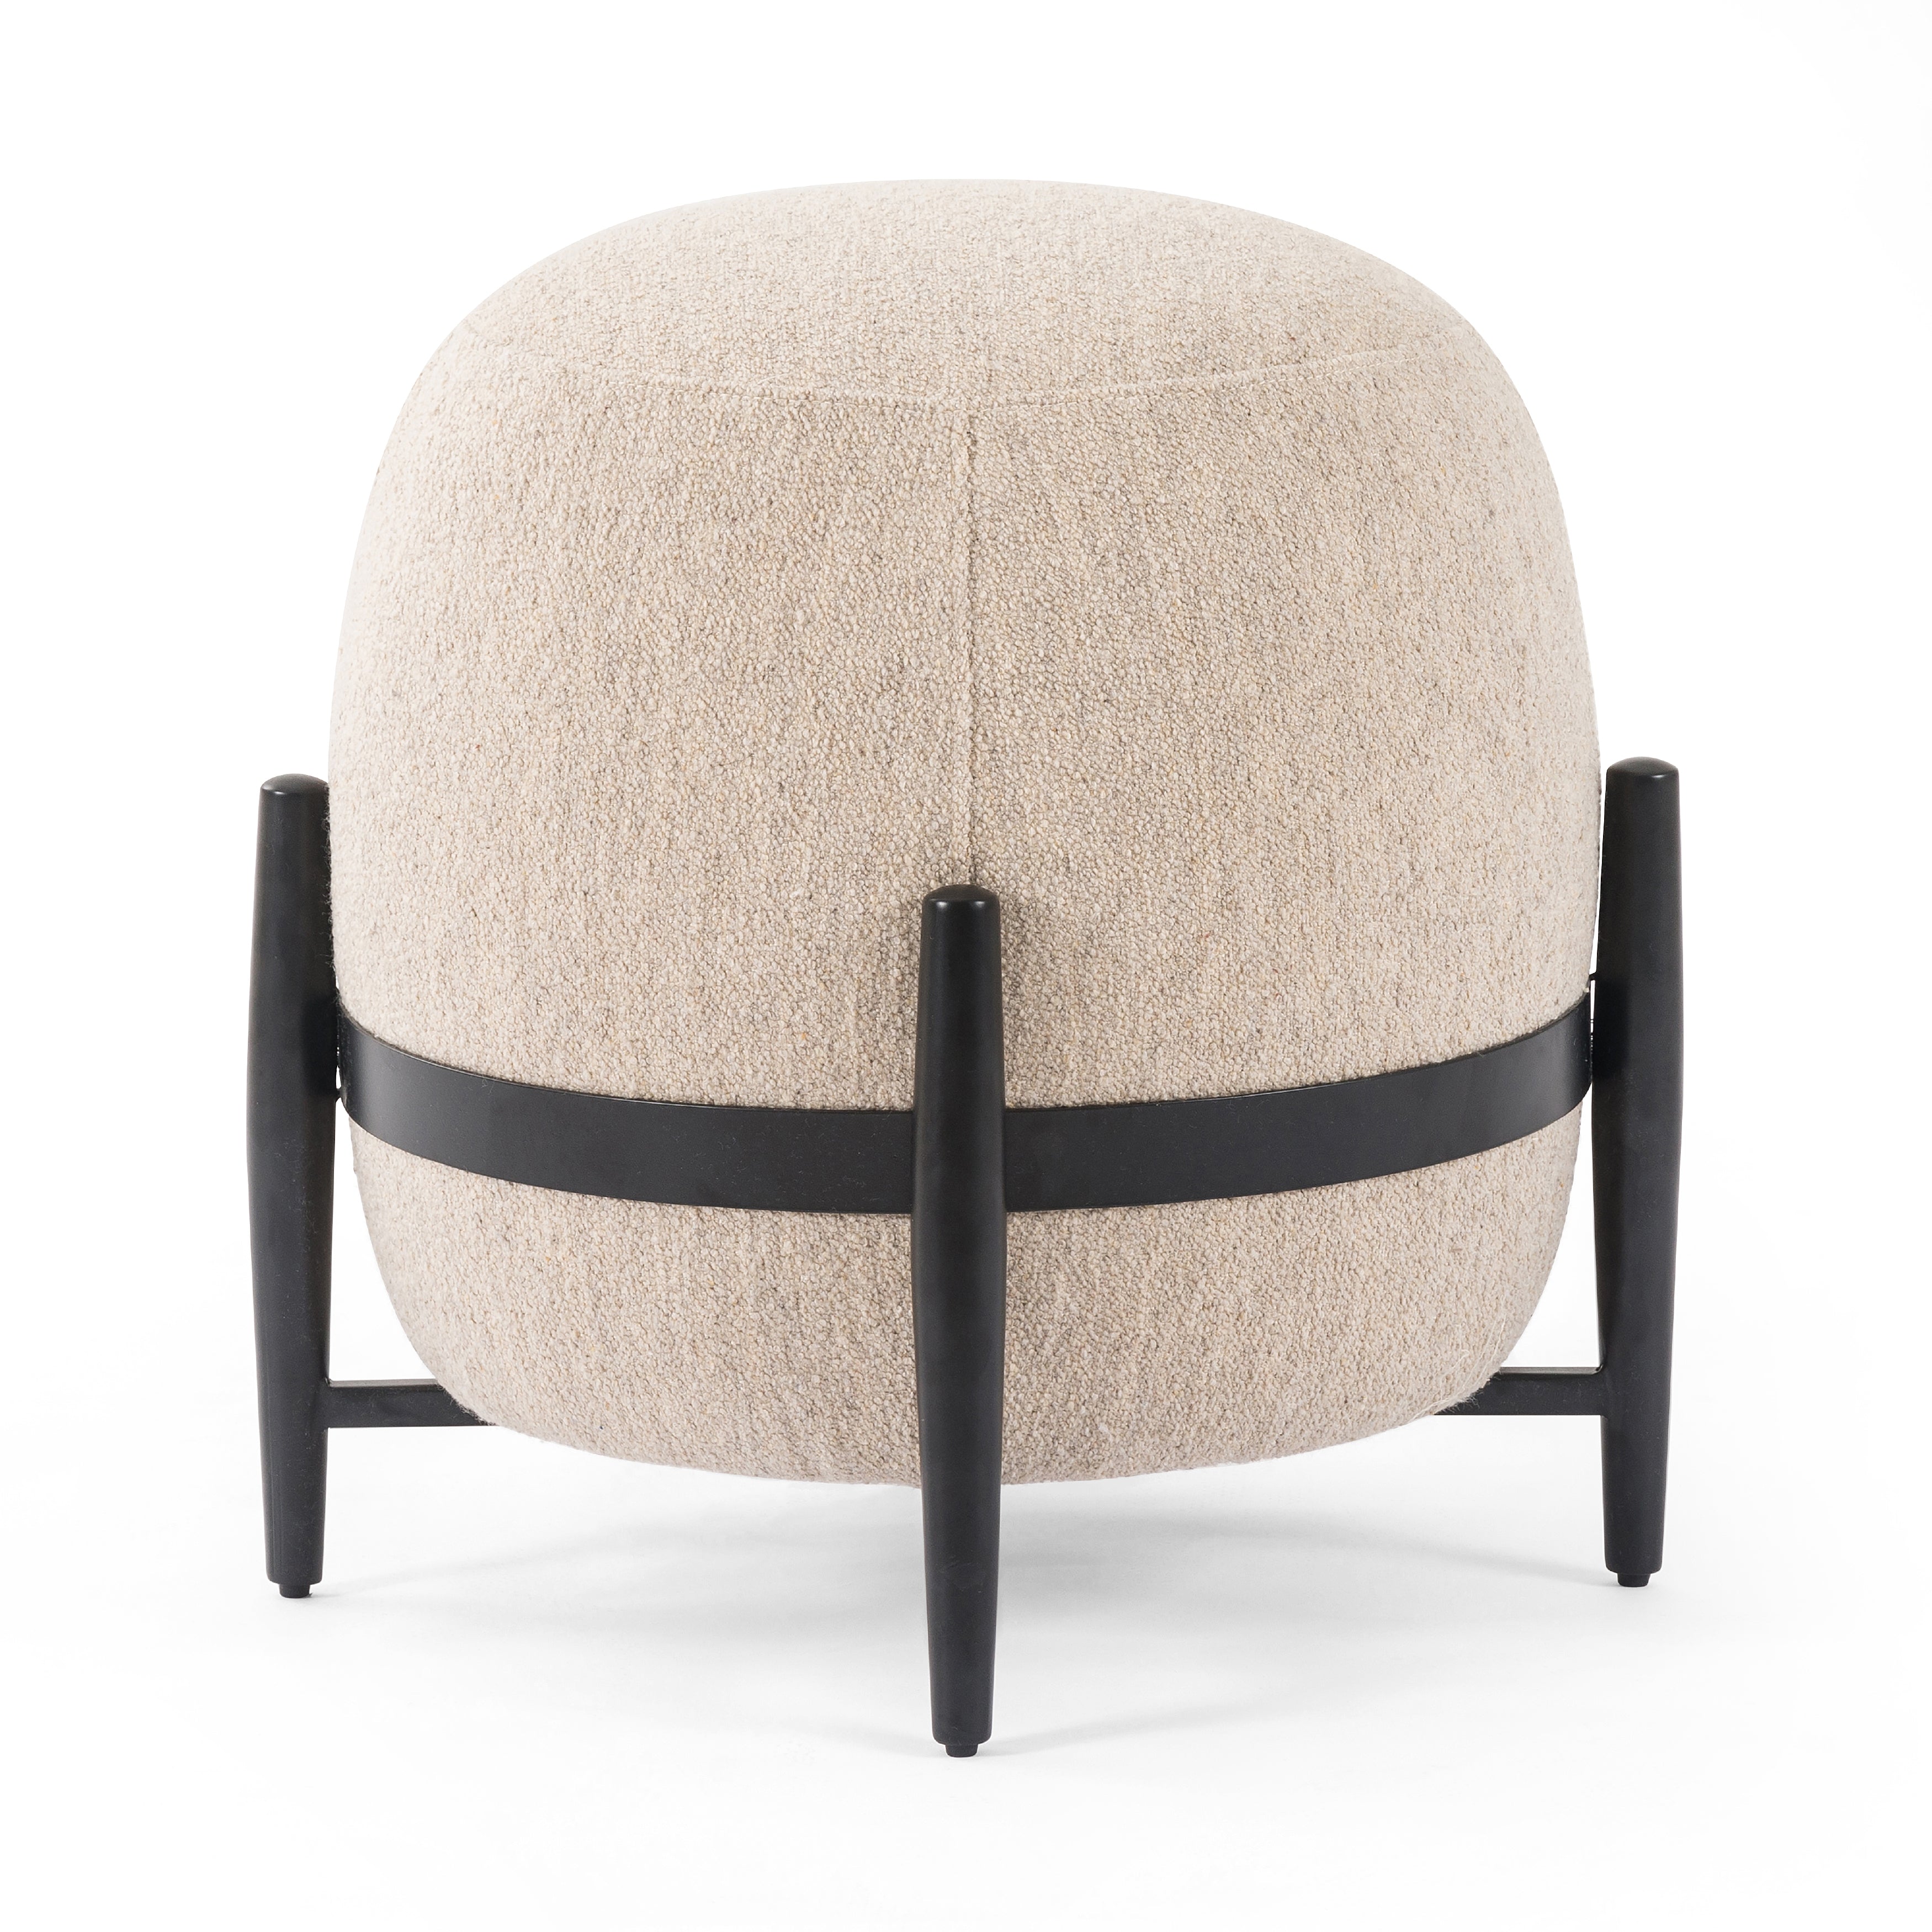 The Sia Athena Taupe Ottoman is beautifully shaped and perfect for relaxing on after a long day. It gives a retro, transitional look. Amethyst Home provides interior design services, furniture, rugs, and lighting in the Calabasas metro area.